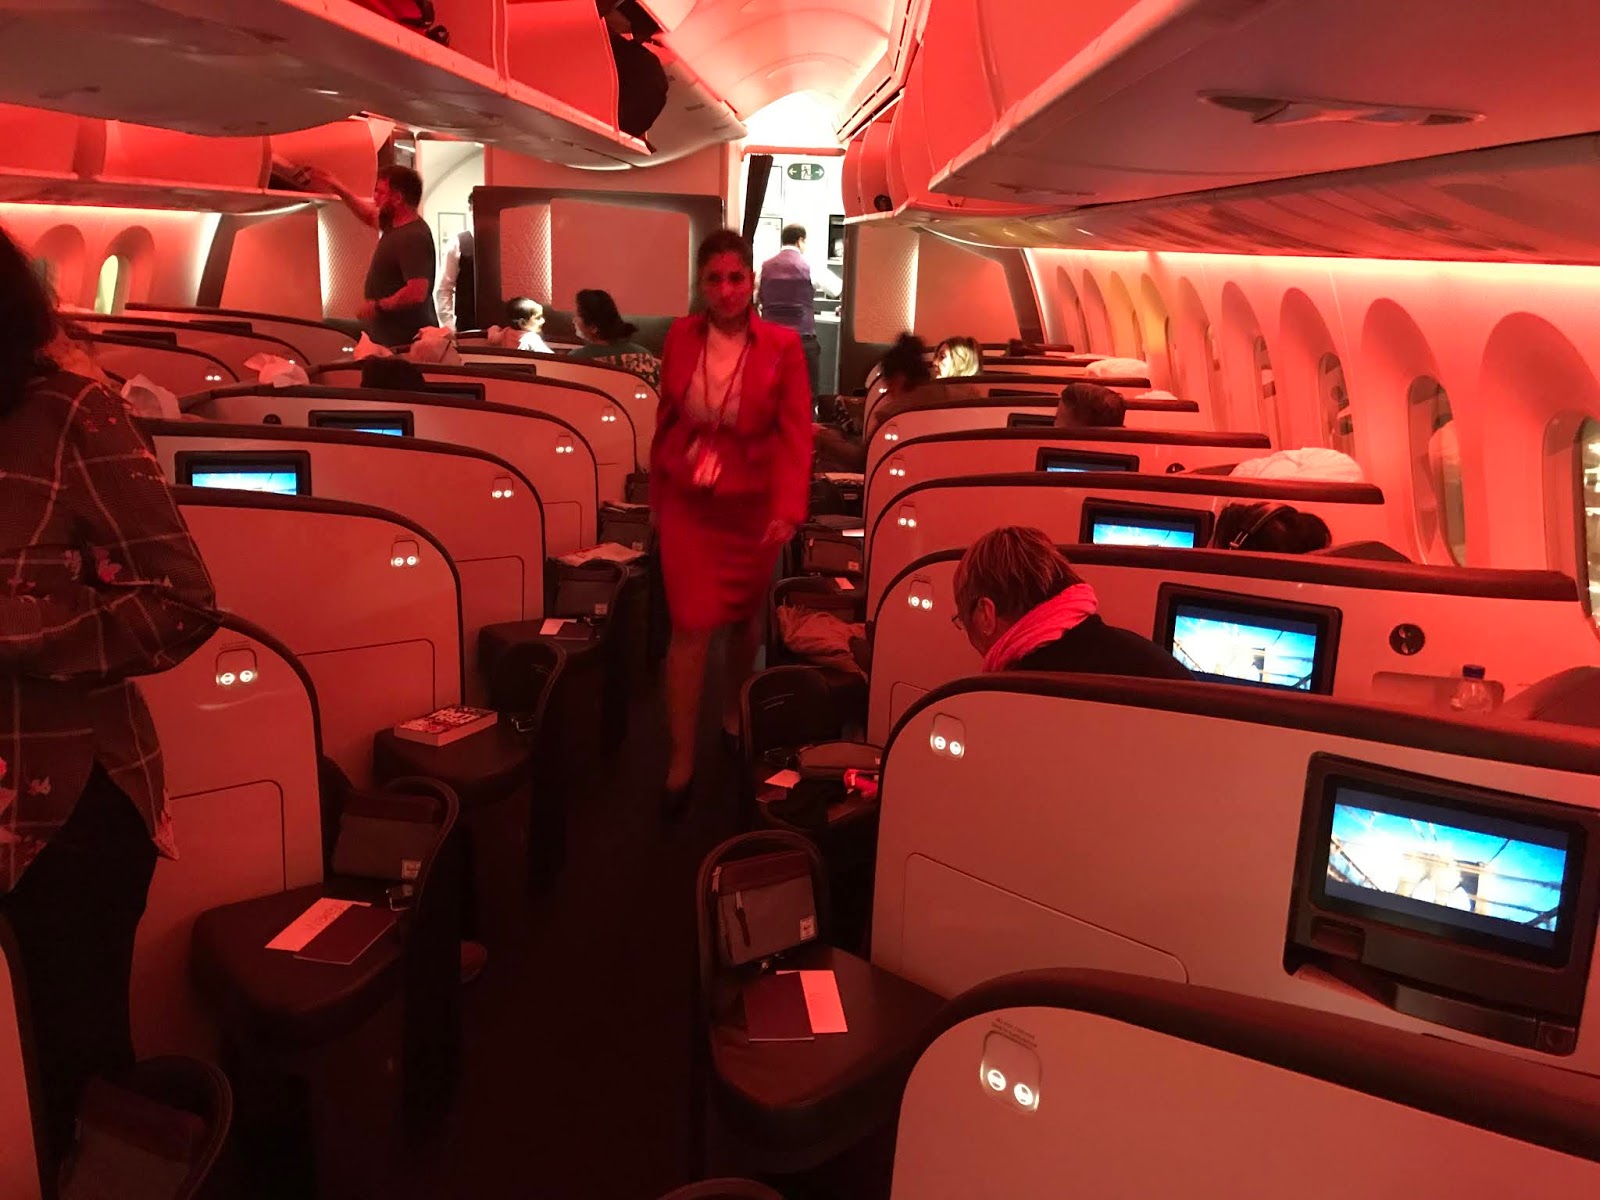 Moiras Travel Blog With Emirates Cabin Crew On The Side Virgin